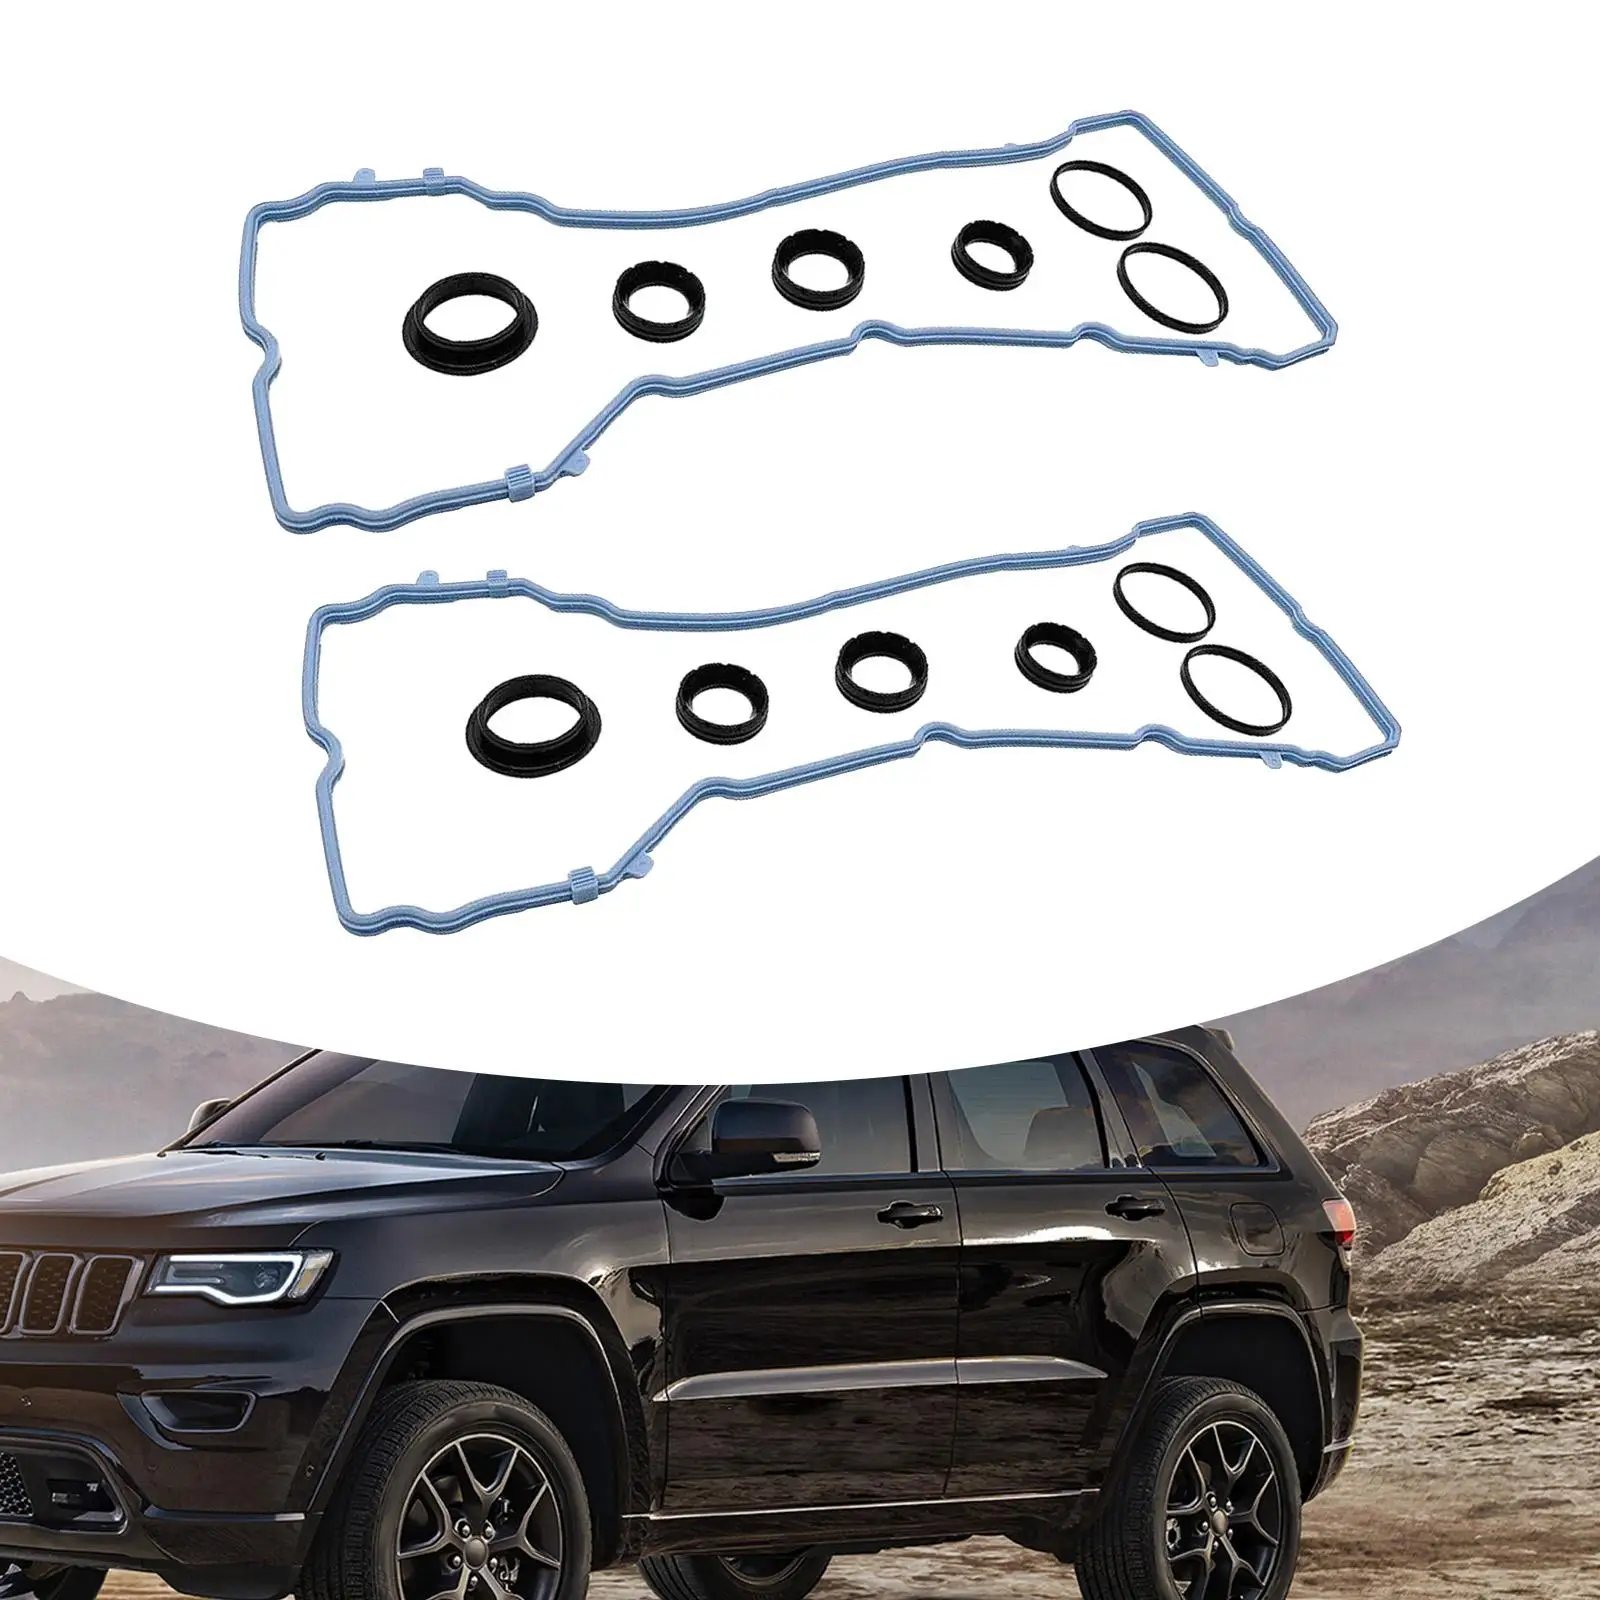 Valve Cover Gasket Set High Quality Directly Replace 5184596AE VS50805R VS 50805 R for Jeep Grand Cherokee Auto Accessories